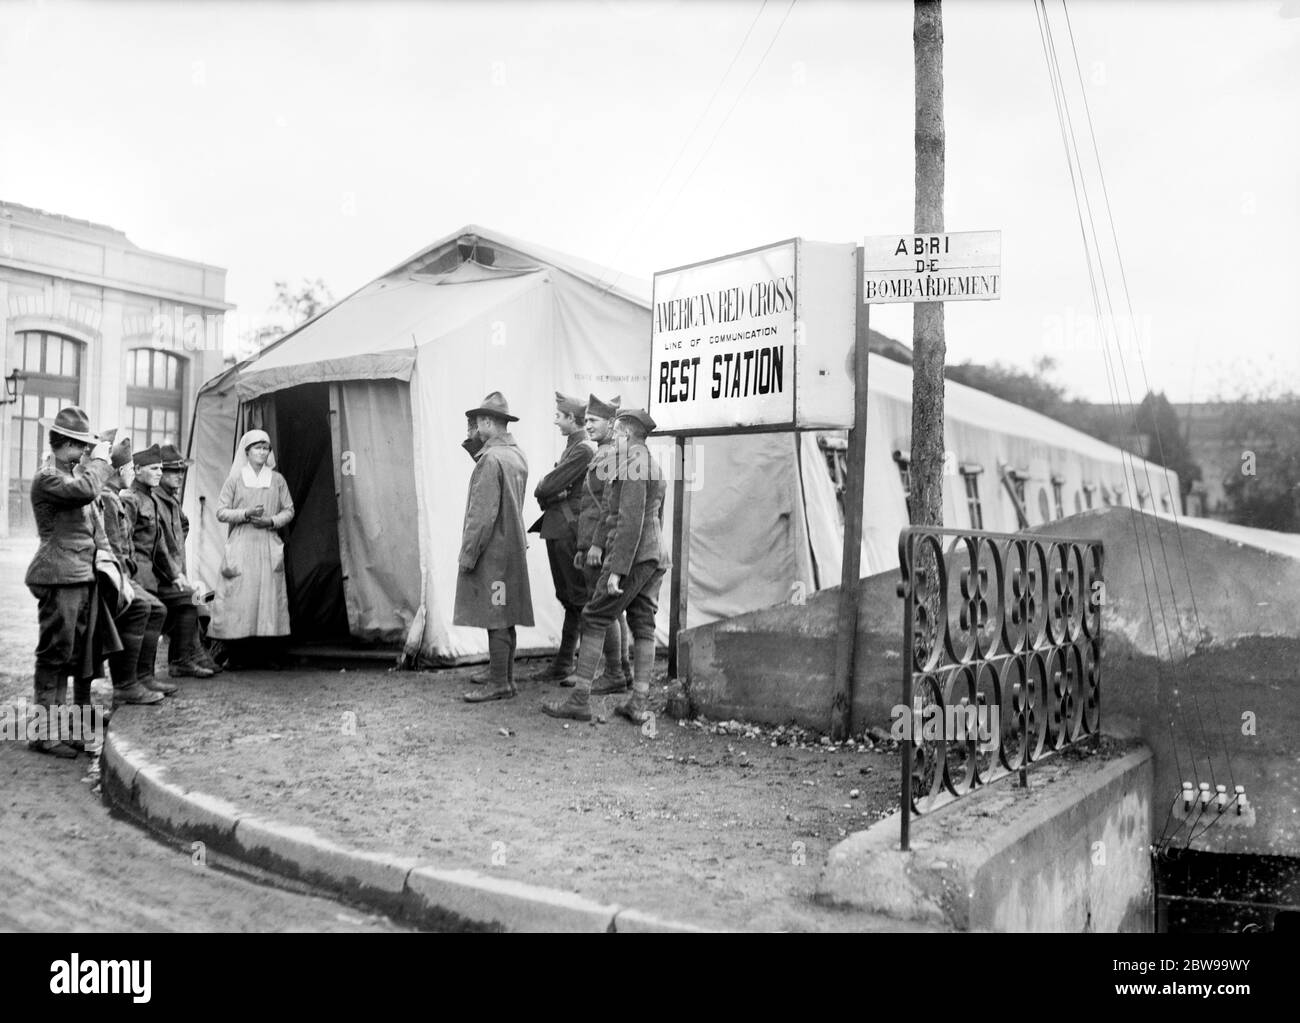 American Red Cross Worker with Soldiers at ARC Rest Station next to Bomb Shelter, Toul, France, Lewis Wickes Hine, American National Red Cross Photograph Collection, June 1918 Stock Photo